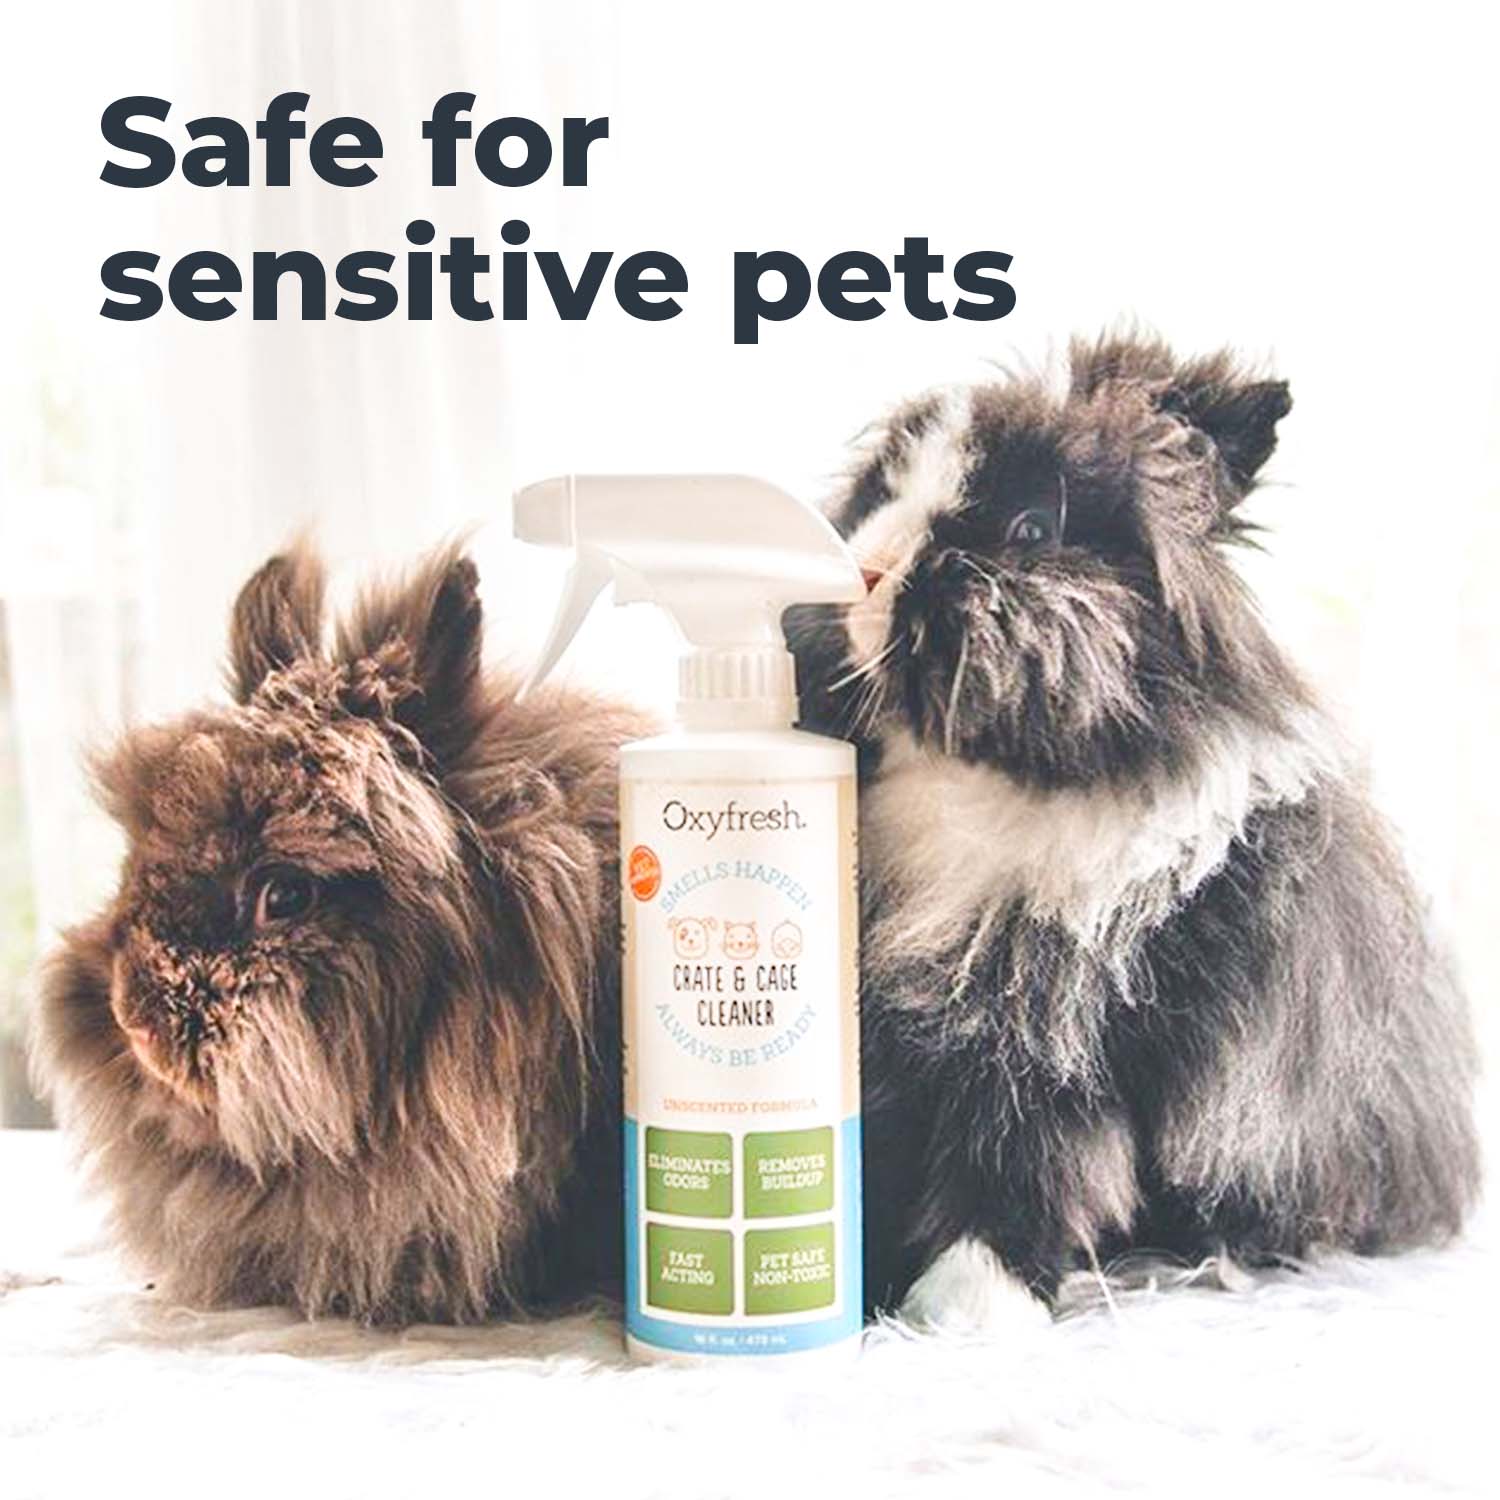 oxyfresh-cage-and-crate-cleaner-safe-for-sensitive-pets